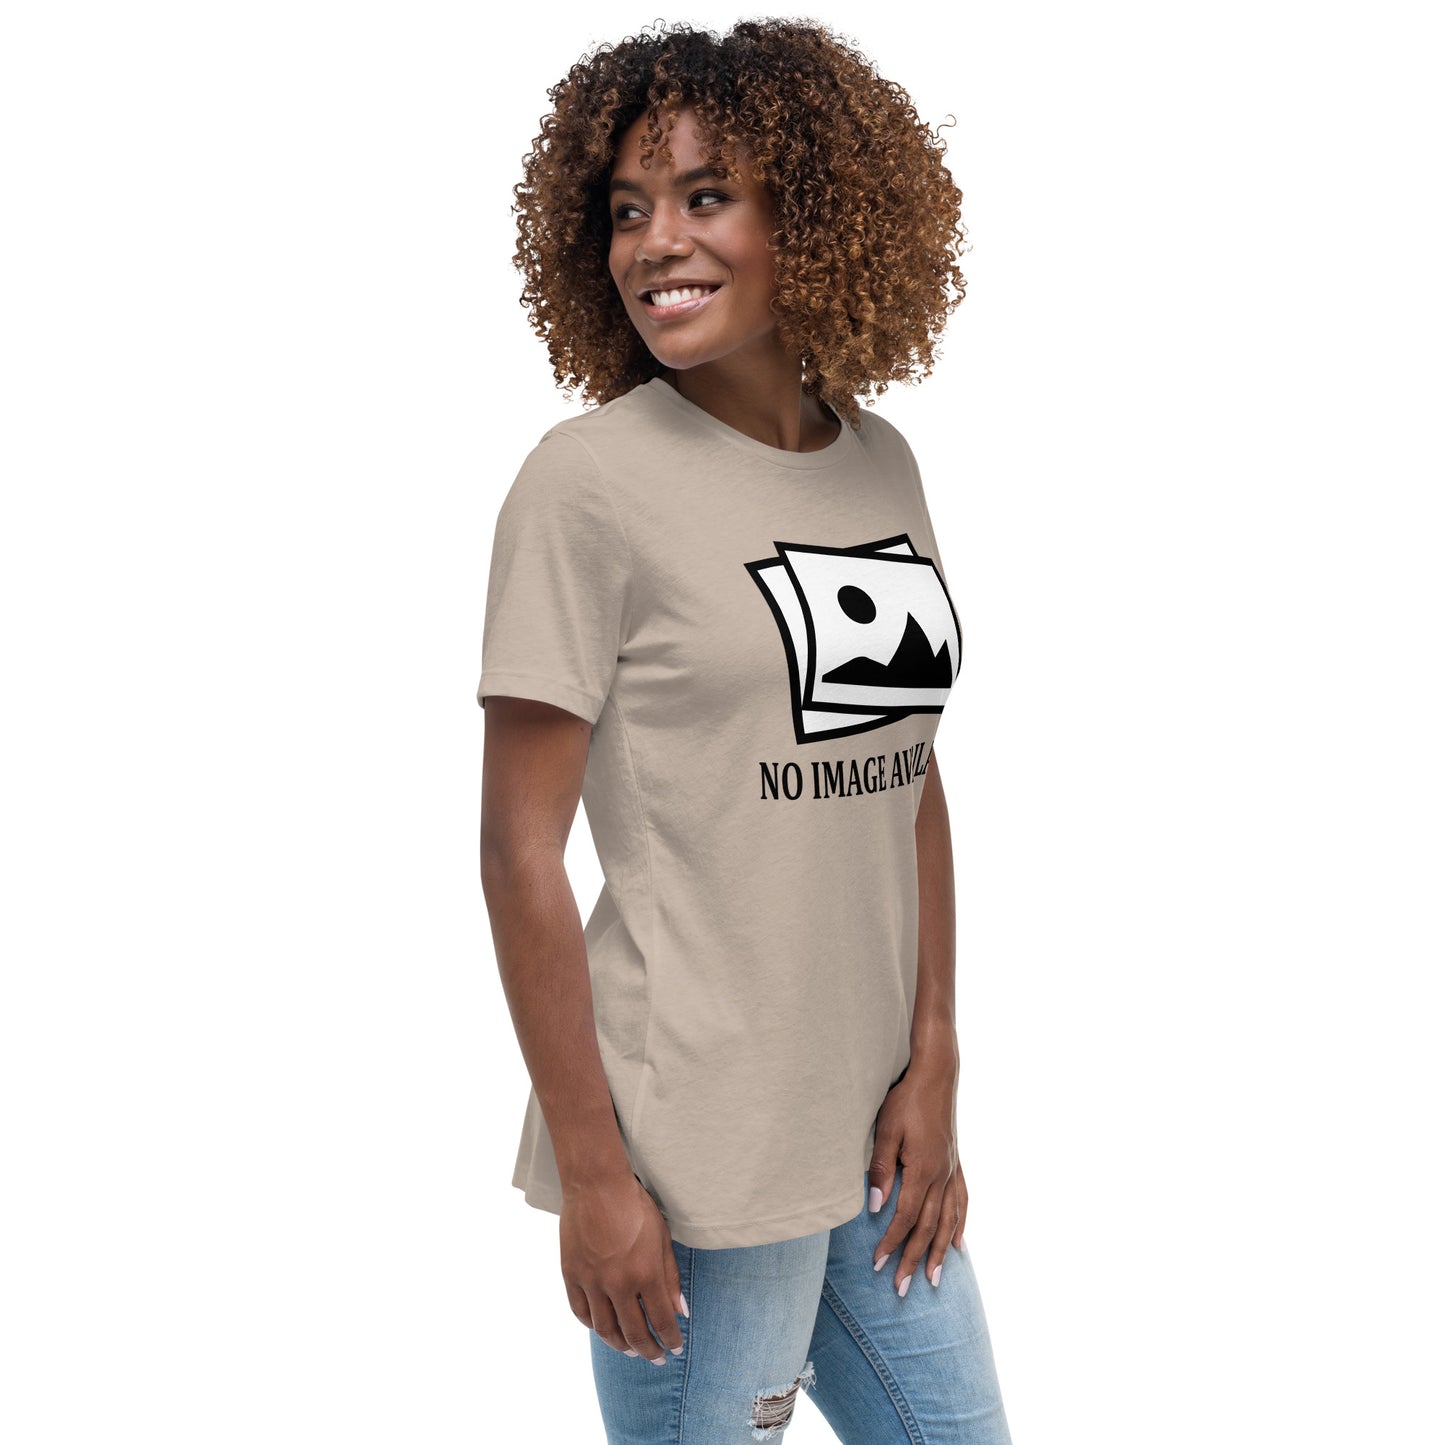 Women with stone t-shirt with image and text "no image available"